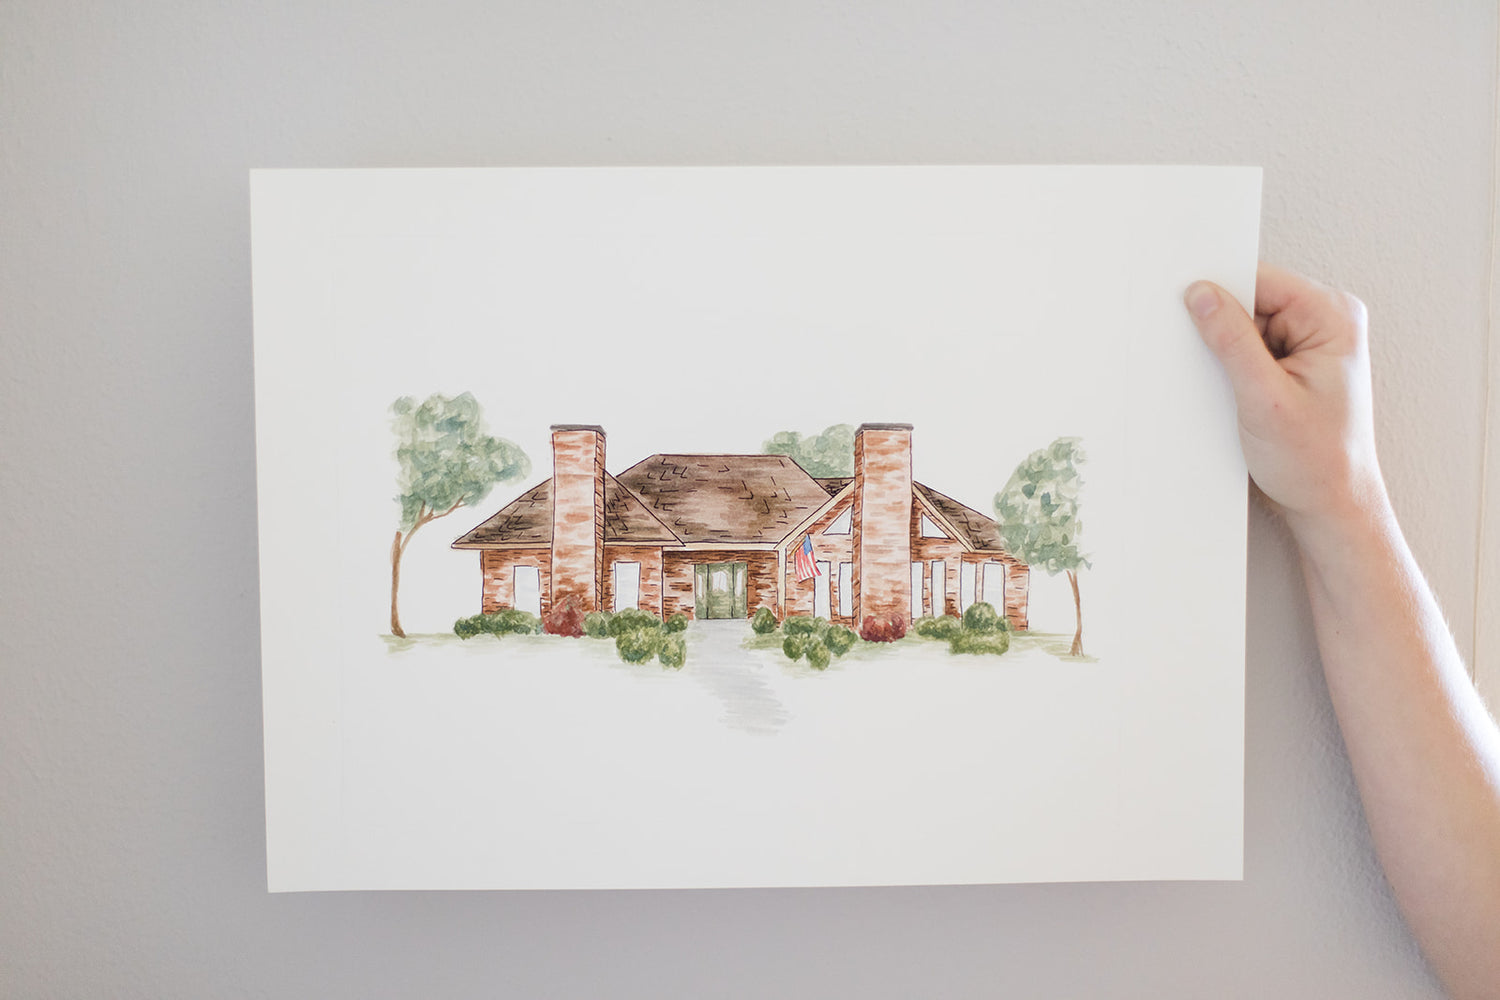 Watercolor home illustration gift for new home owners, housewarming gift for new move, painting of red brick home with chimneys in vignette style | Custom Watercolor Wedding Invitations, Dallas, Texas | By Caroline Ann